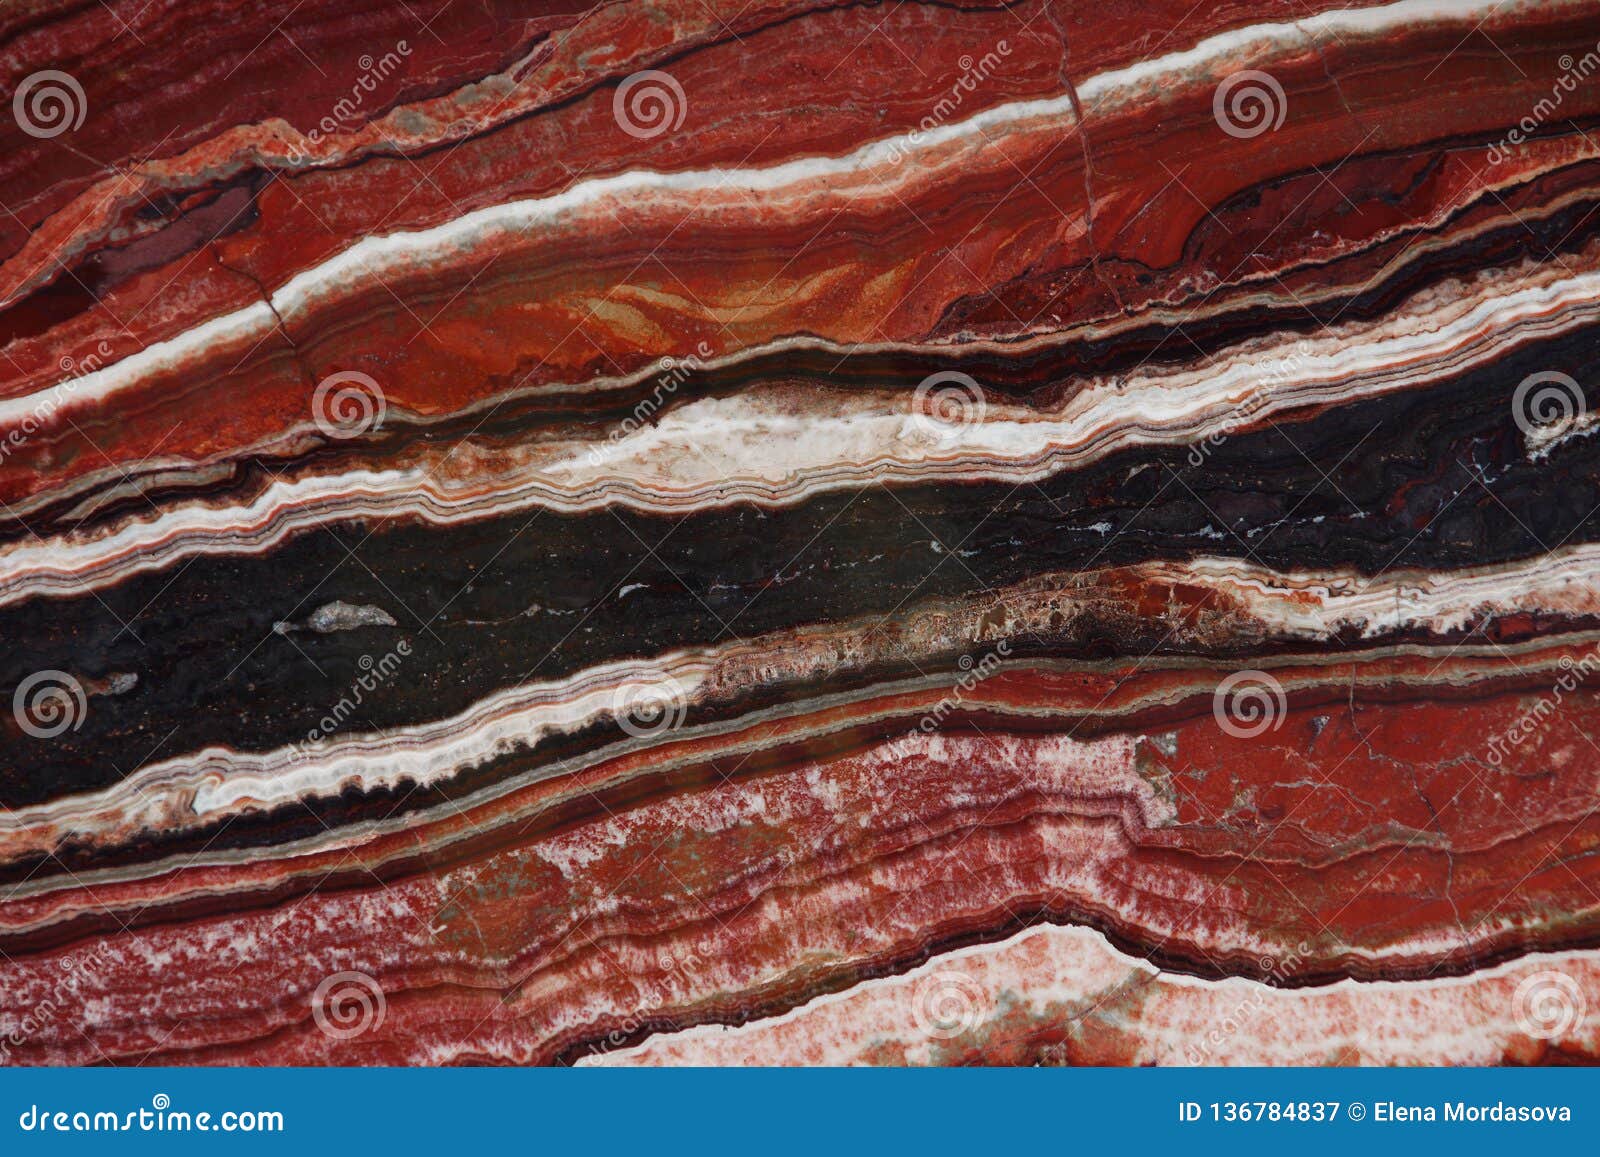 natural stone of red color with a pattern called onice fantastico